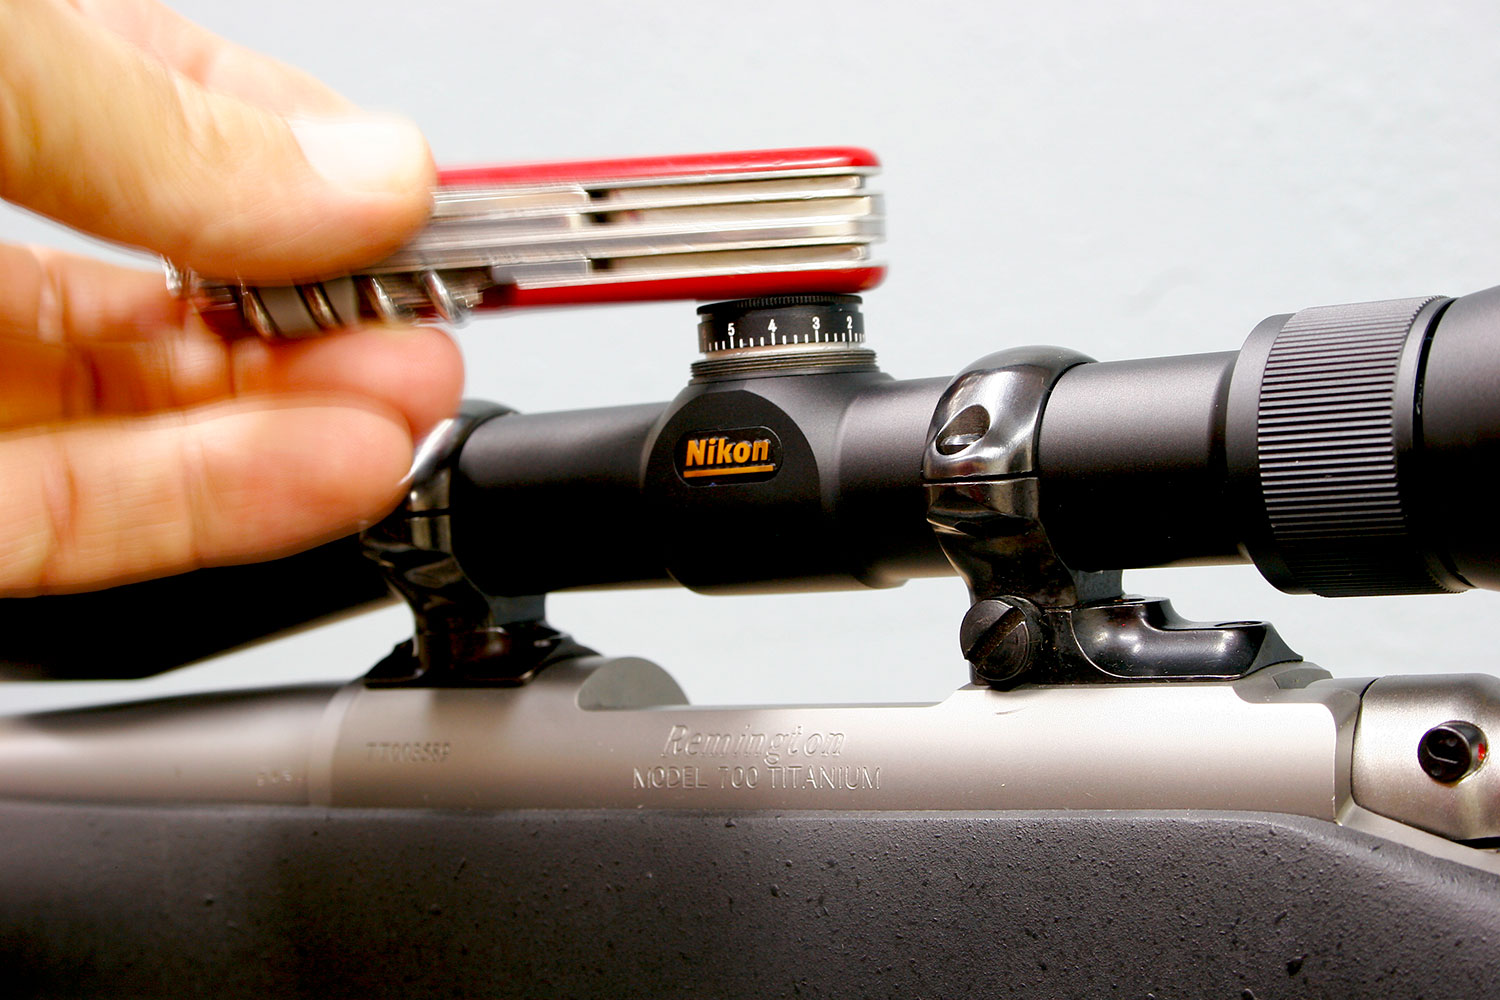 Hand using a swiss army knife on a rifle scope.